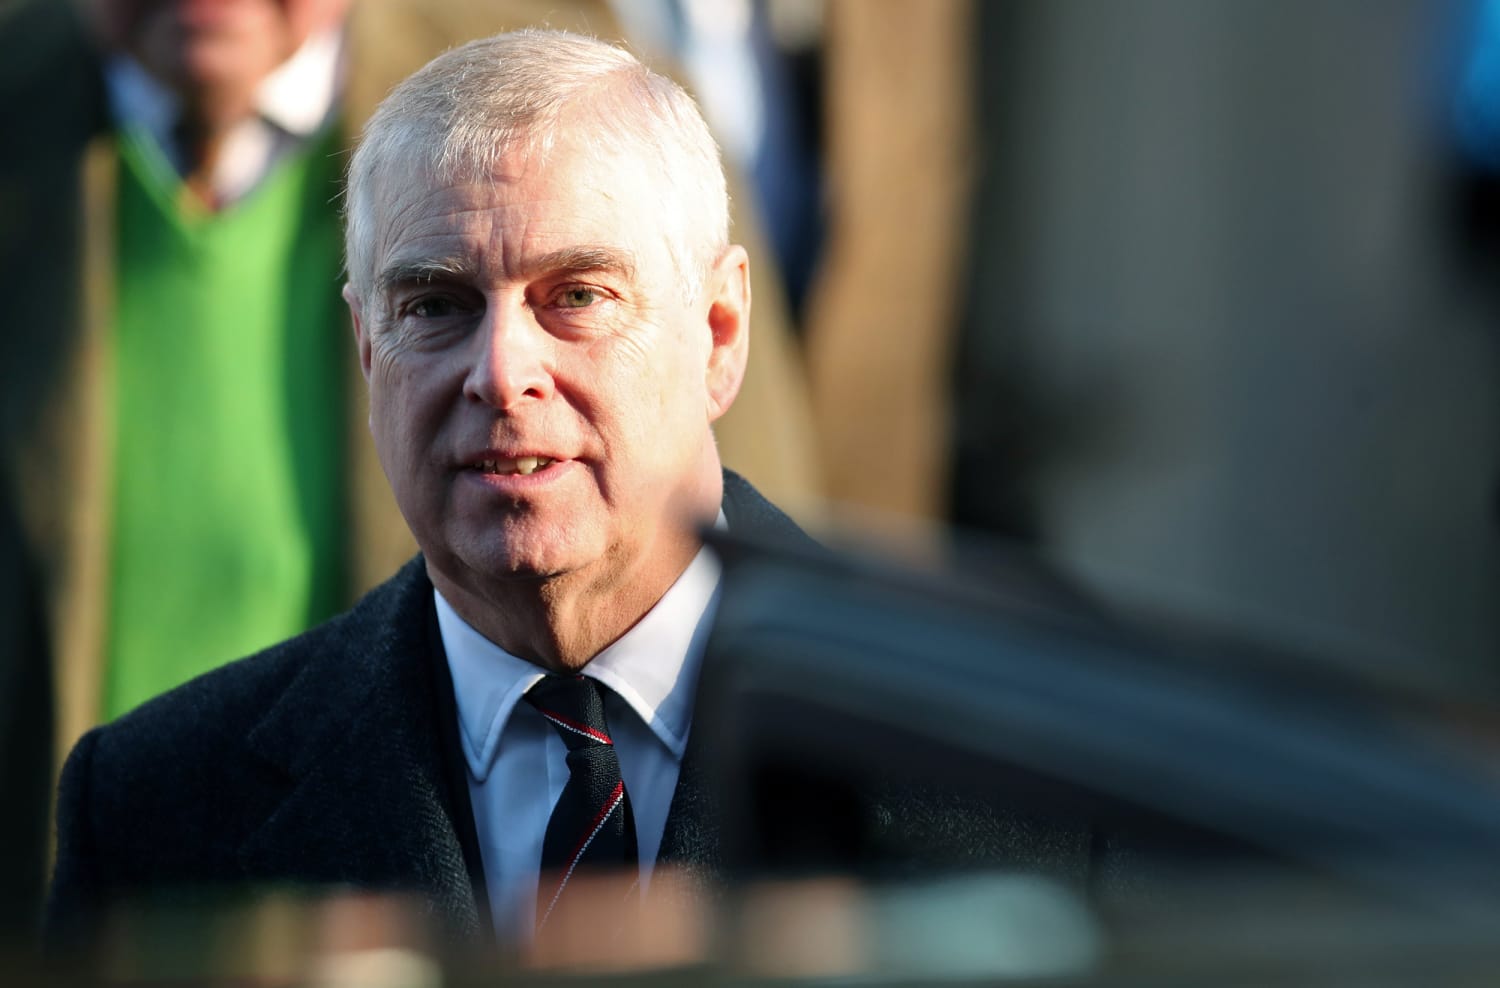 What Now For Prince Andrew Royal Faces Scrutiny After Ghislaine Maxwell S Arrest